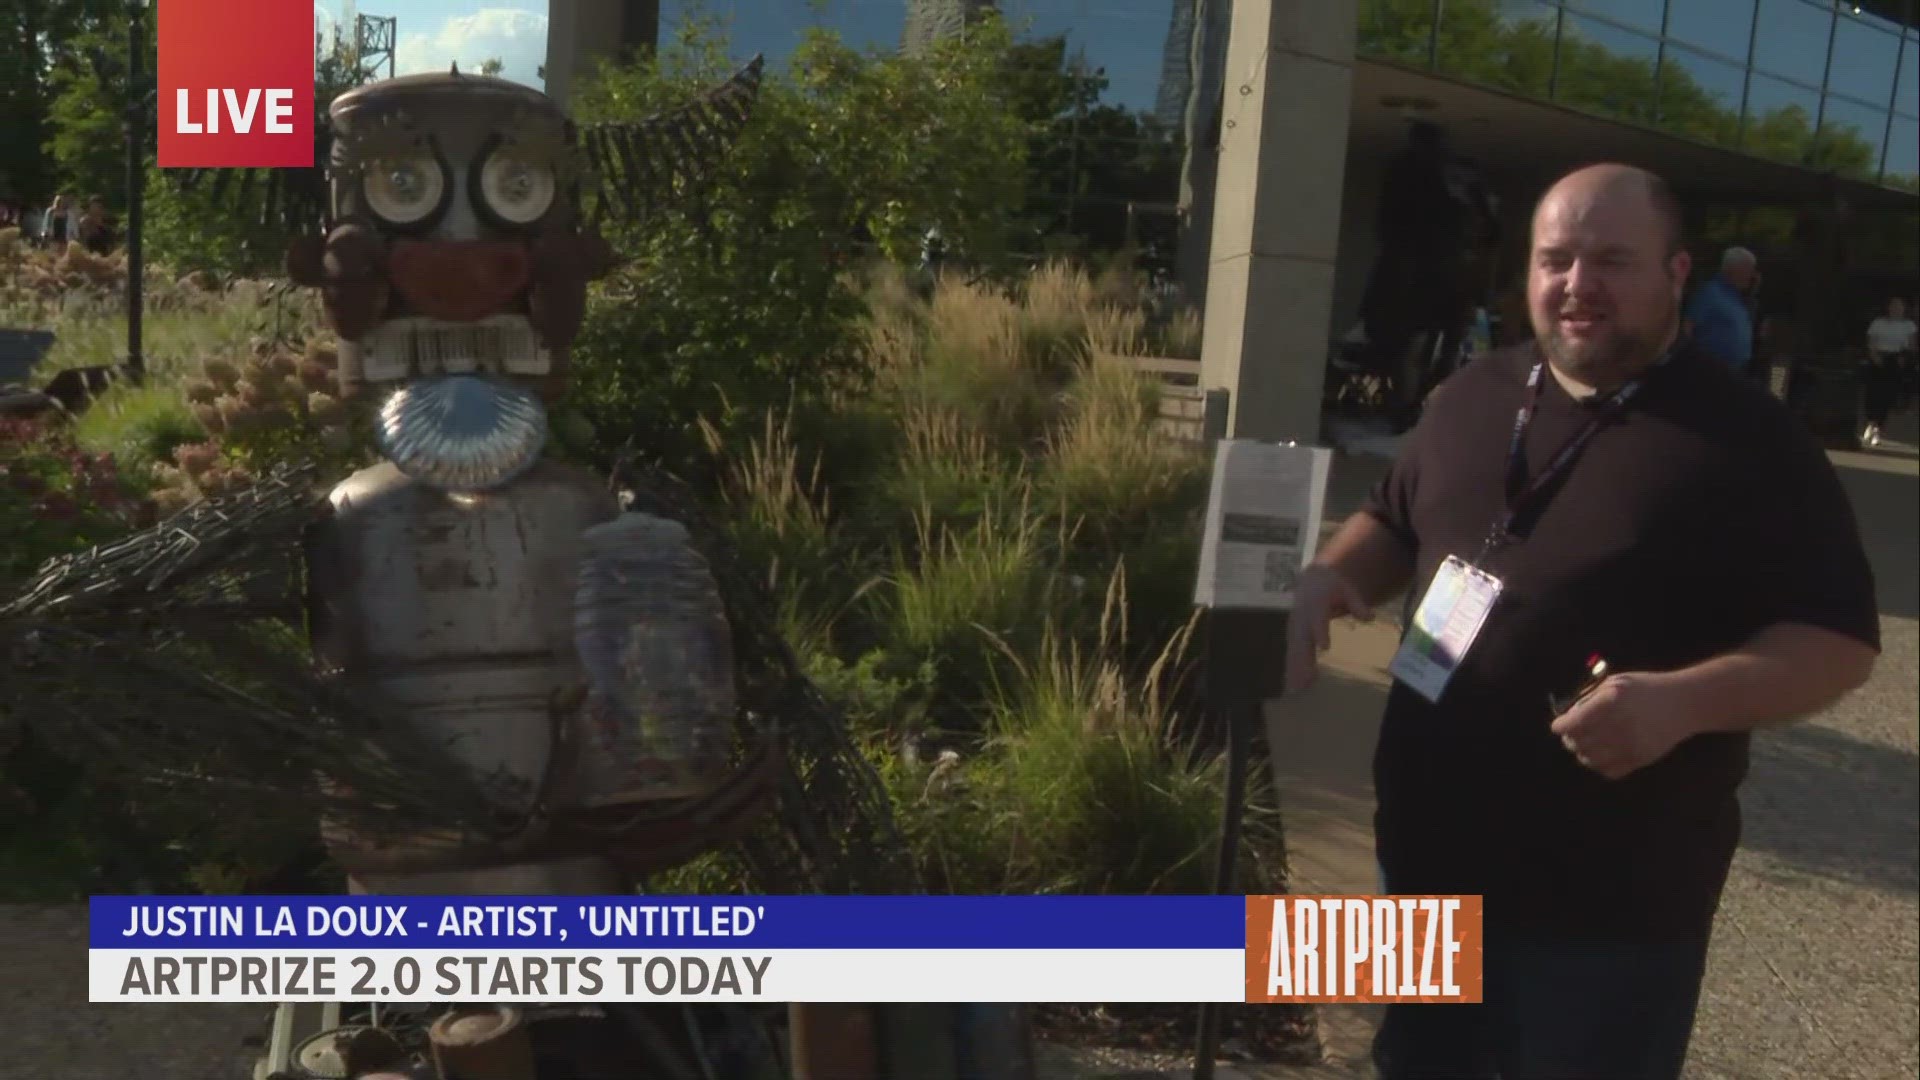 Justin La Doux's piece "Scrap Metal Creature" is made of scrap metals and is only one part of the artists installation.